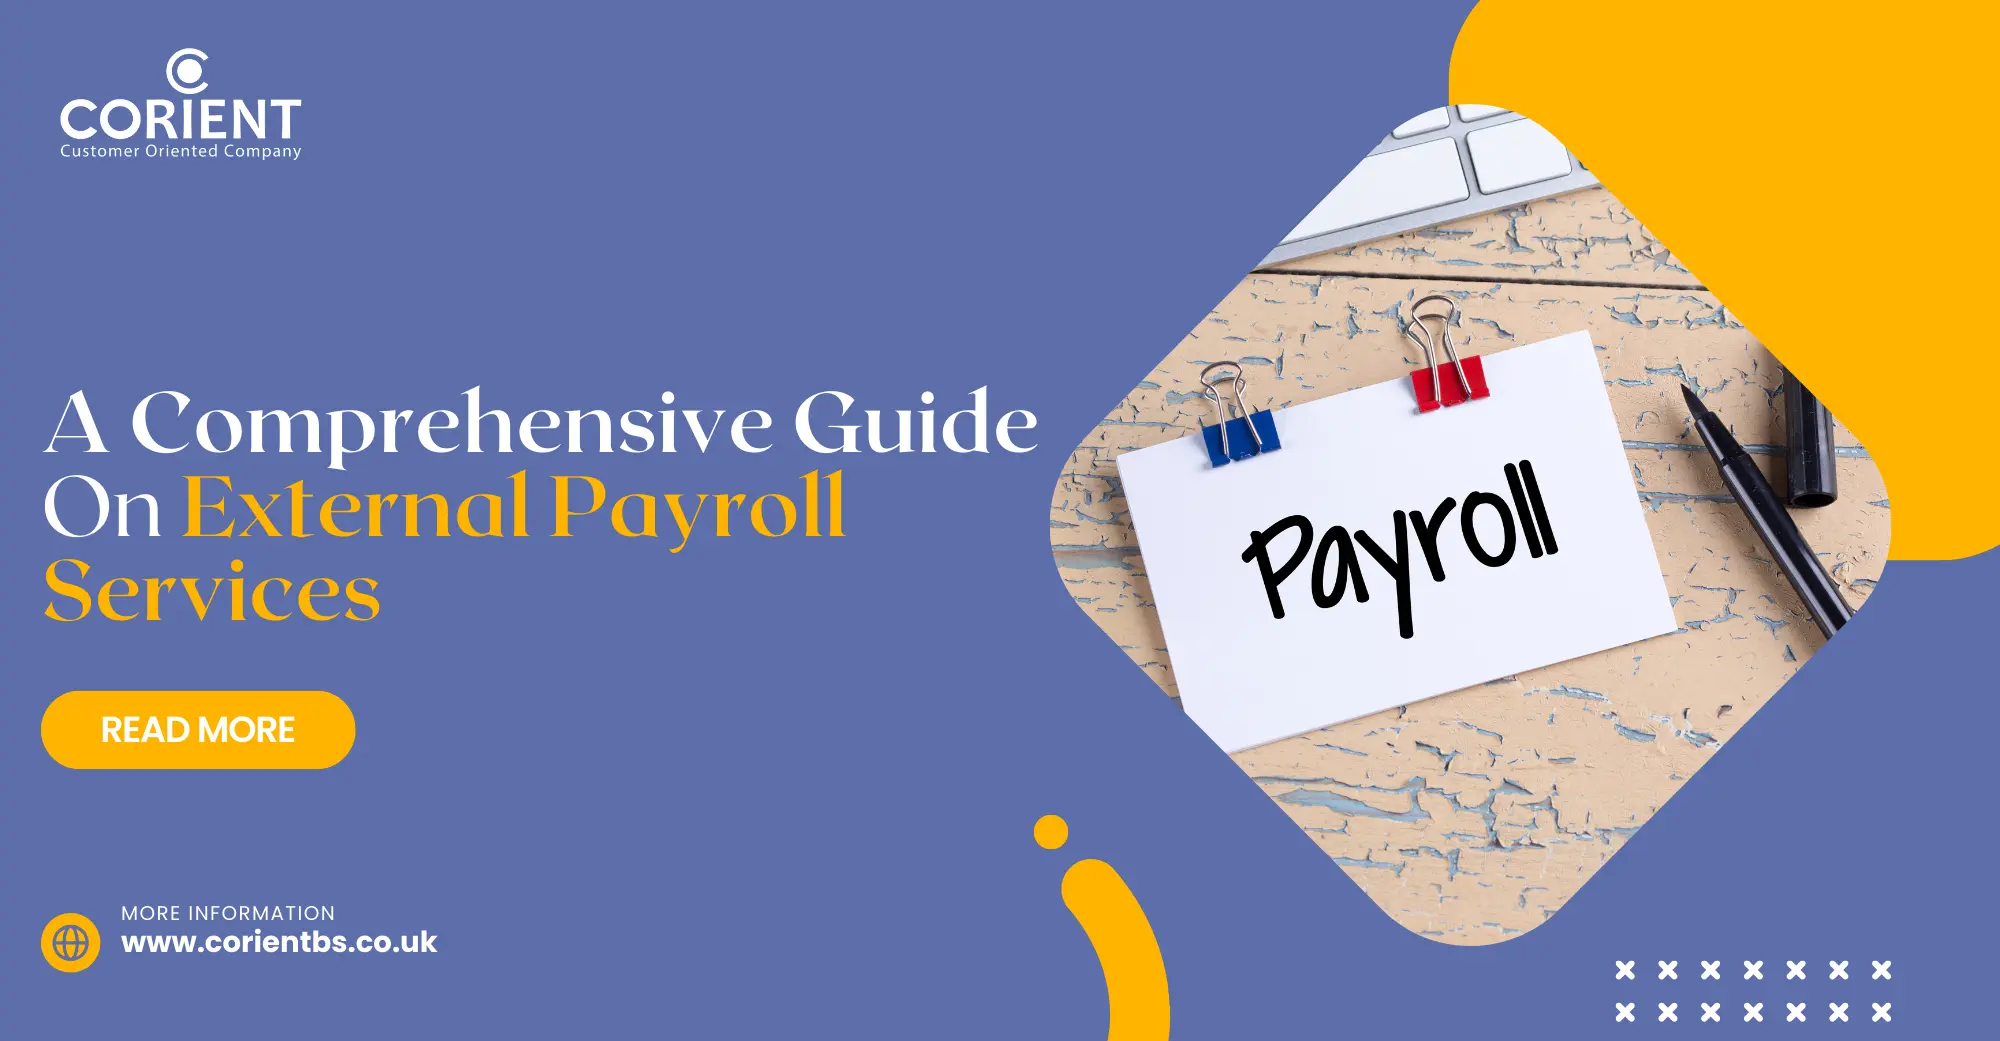 A Comprehensive Guide on External Payroll Services